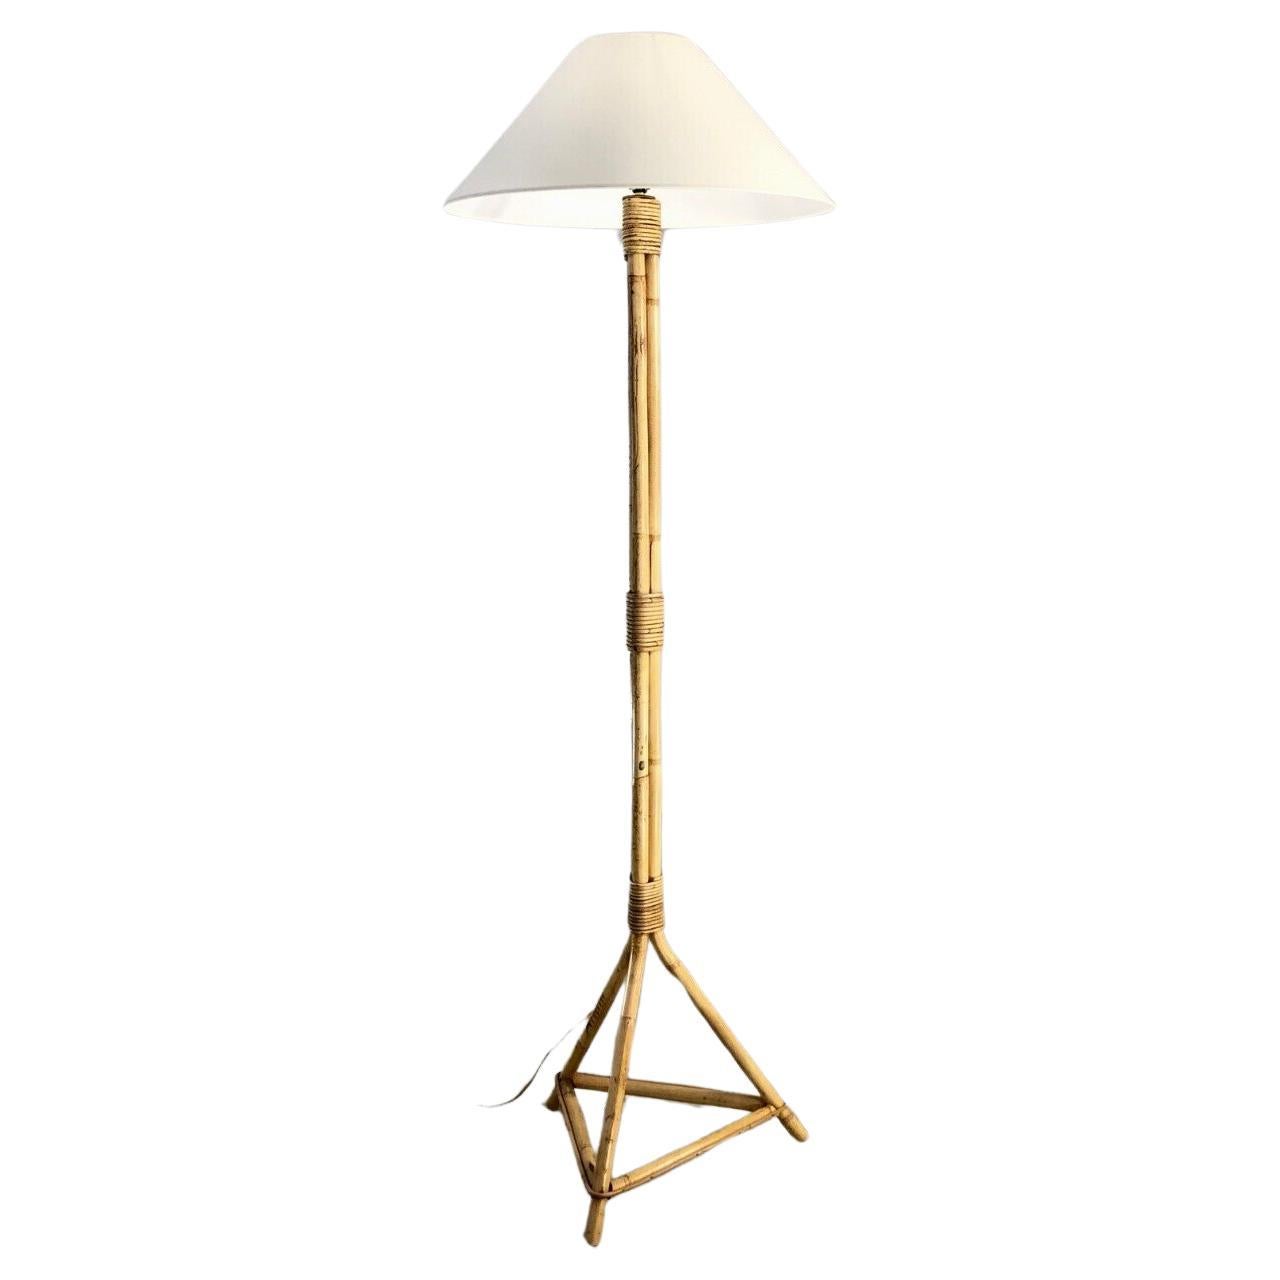 A MODERNIST TRIPOD Bamboo FLOOR LAMP, AUDOUX-MINNET & SOGNOT Style, France 1950